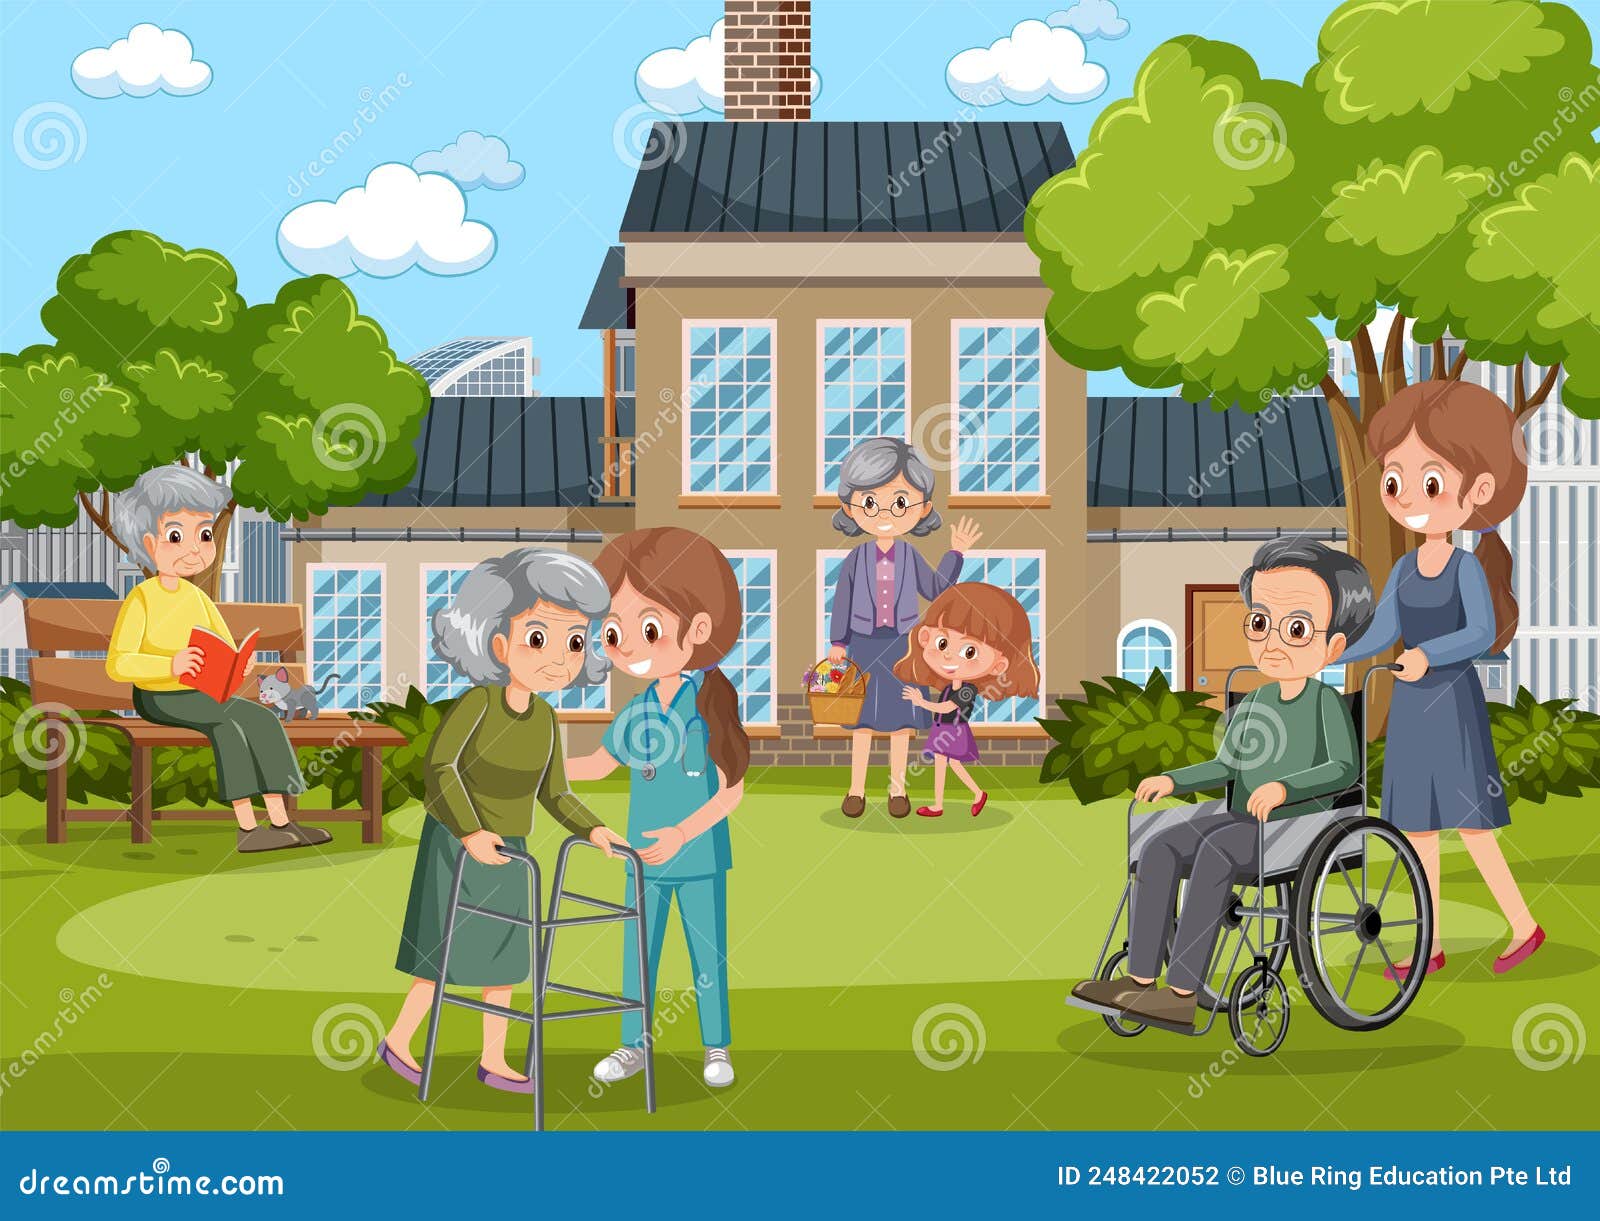 outdoor park with elderly people and caregivers